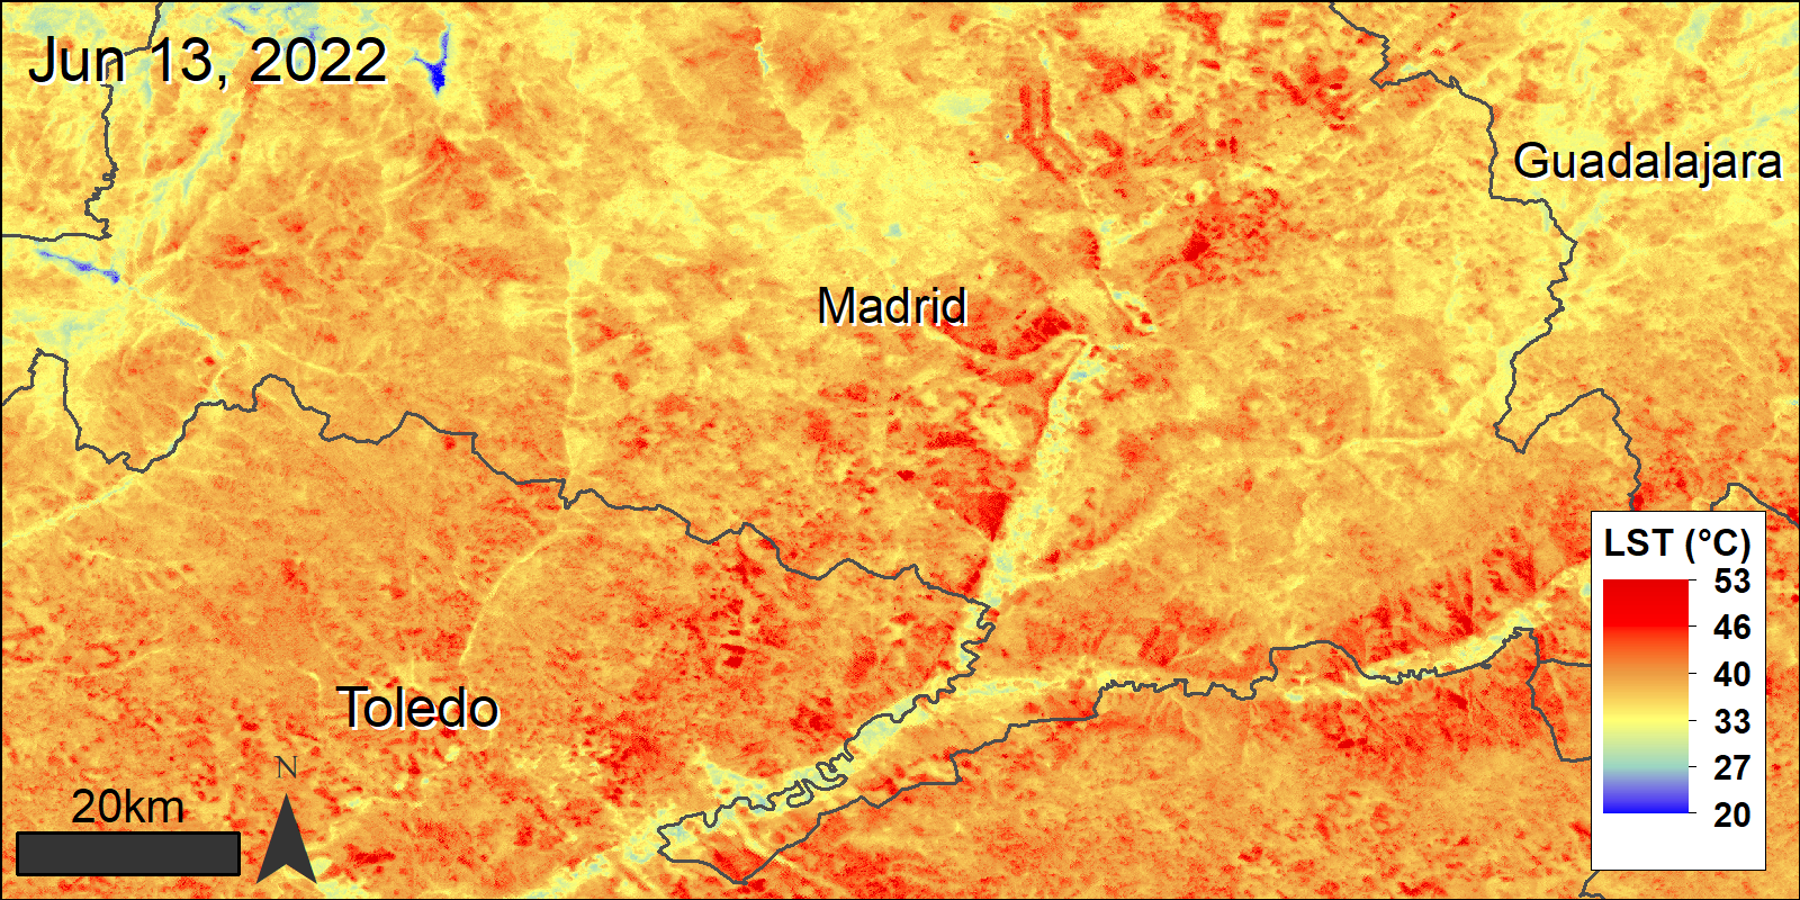 Land Surface Temperature map over Madrid Spain using ECOSTRESS LST data, highlighting the recent heatwave.